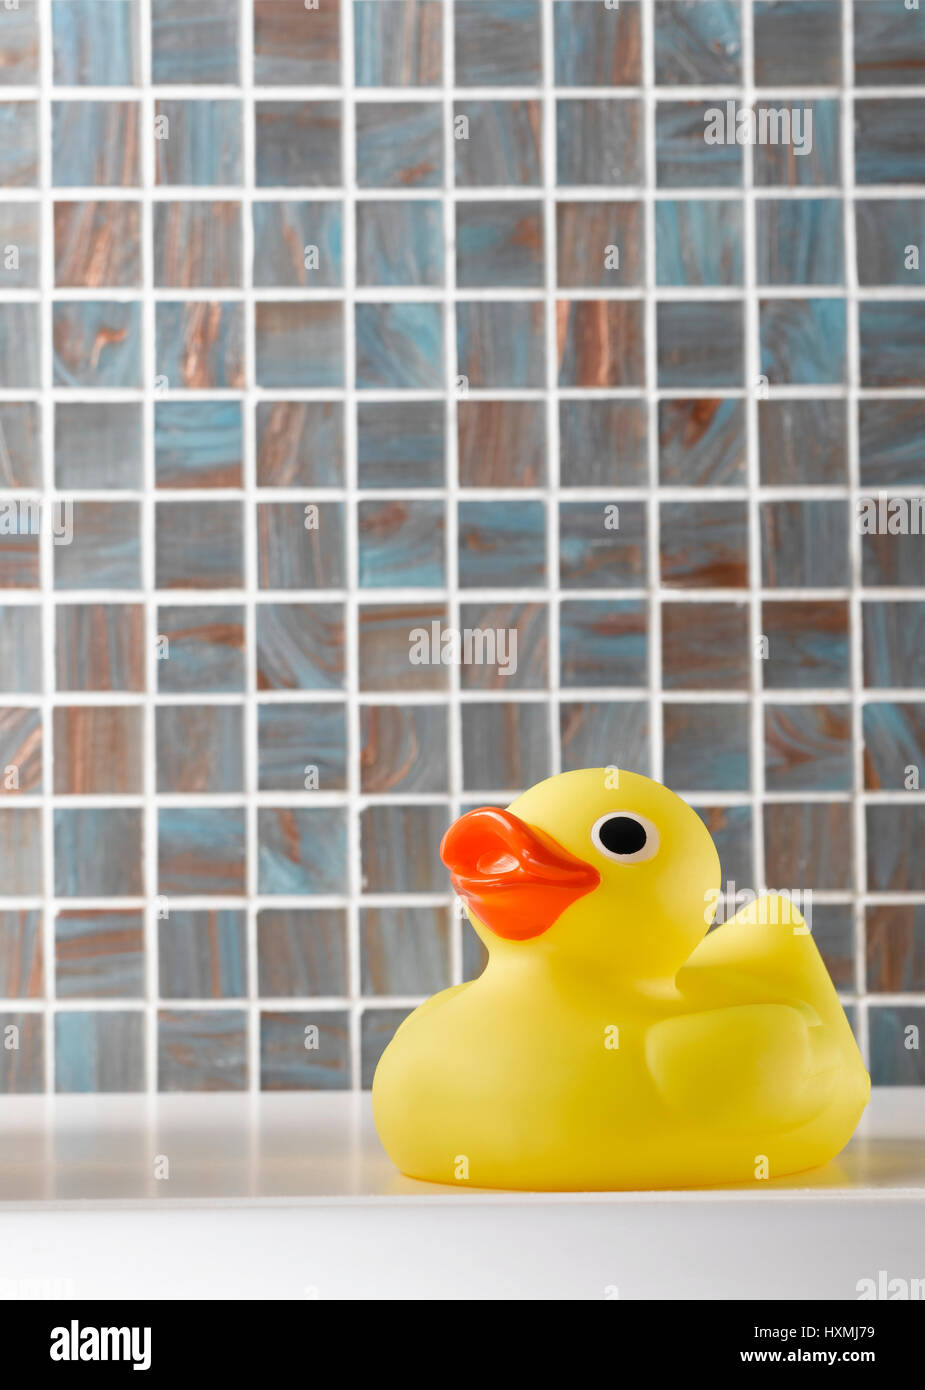 Yellow rubber duck on tiled background Stock Photo